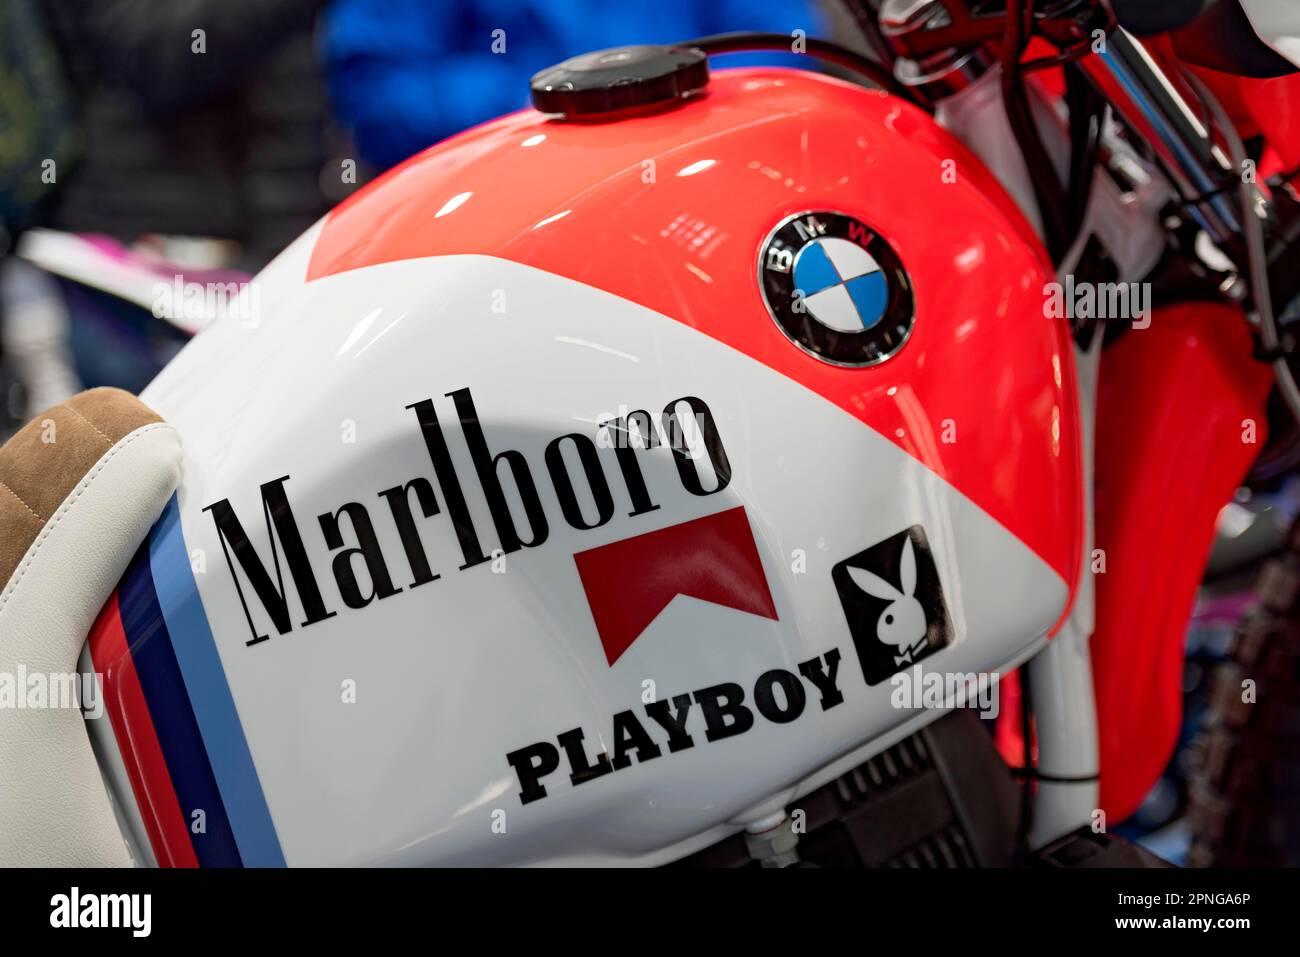 BMW R 80 G S Lac Rose, off-road racing motorbike by Tommy Wagner, logos of Marlboro and Playboy, advertising on the tank, motorbike racing, iMOT Stock Photo